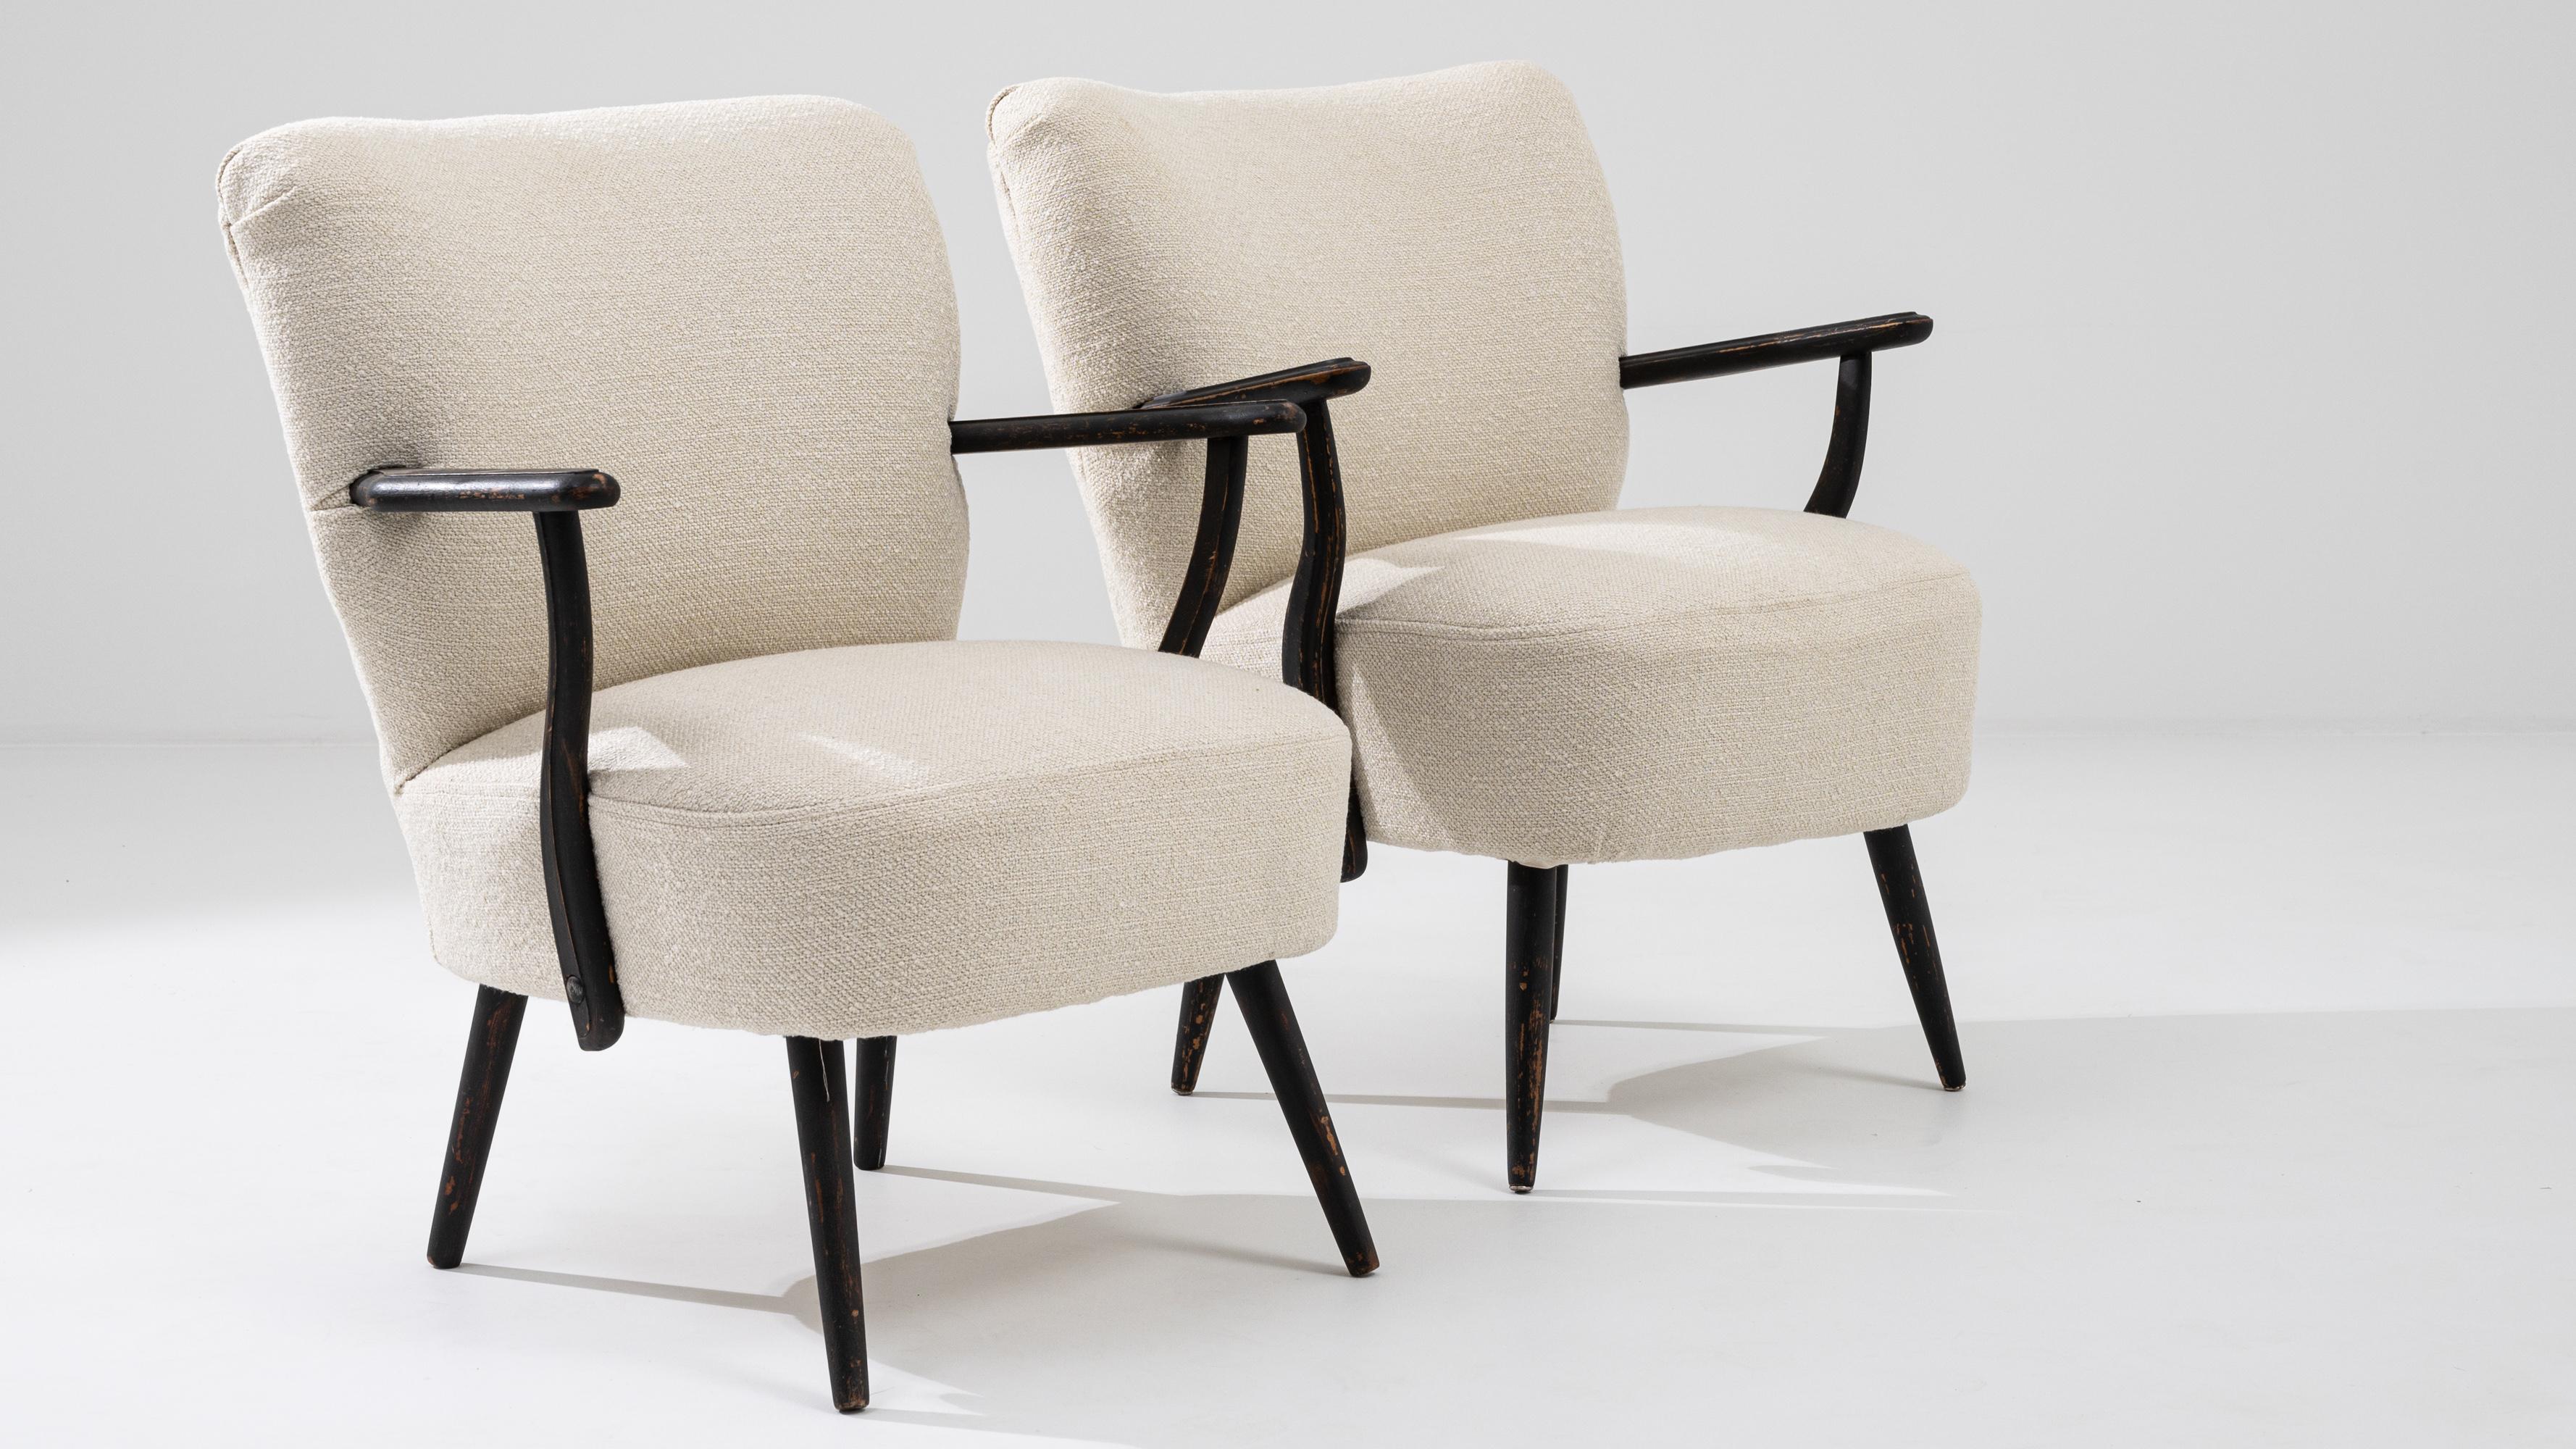 1950s Danish Modern Upholstered Armchairs, a Pair For Sale 4